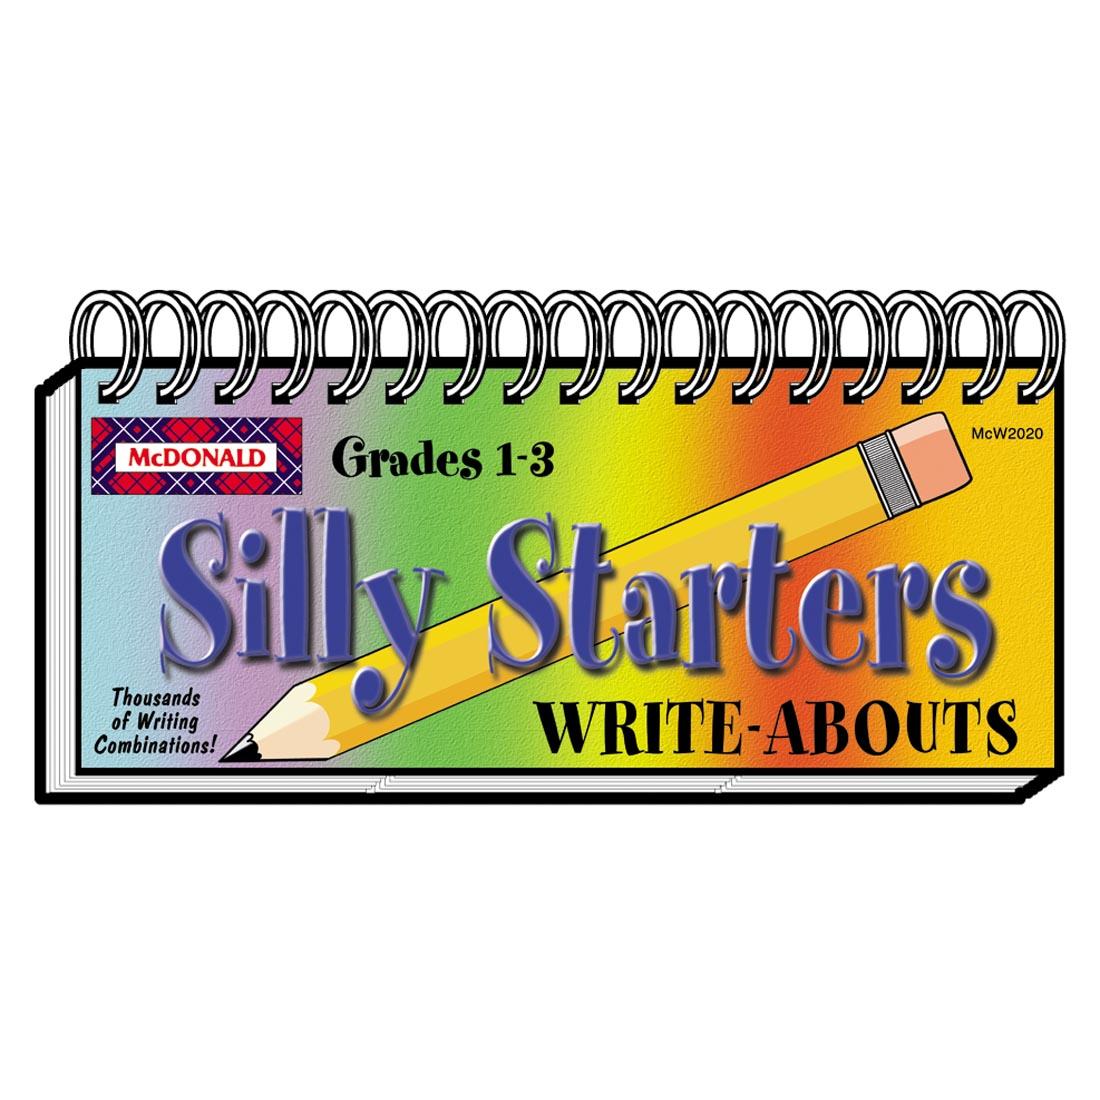 Silly Starters Write Abouts Grades 1-3